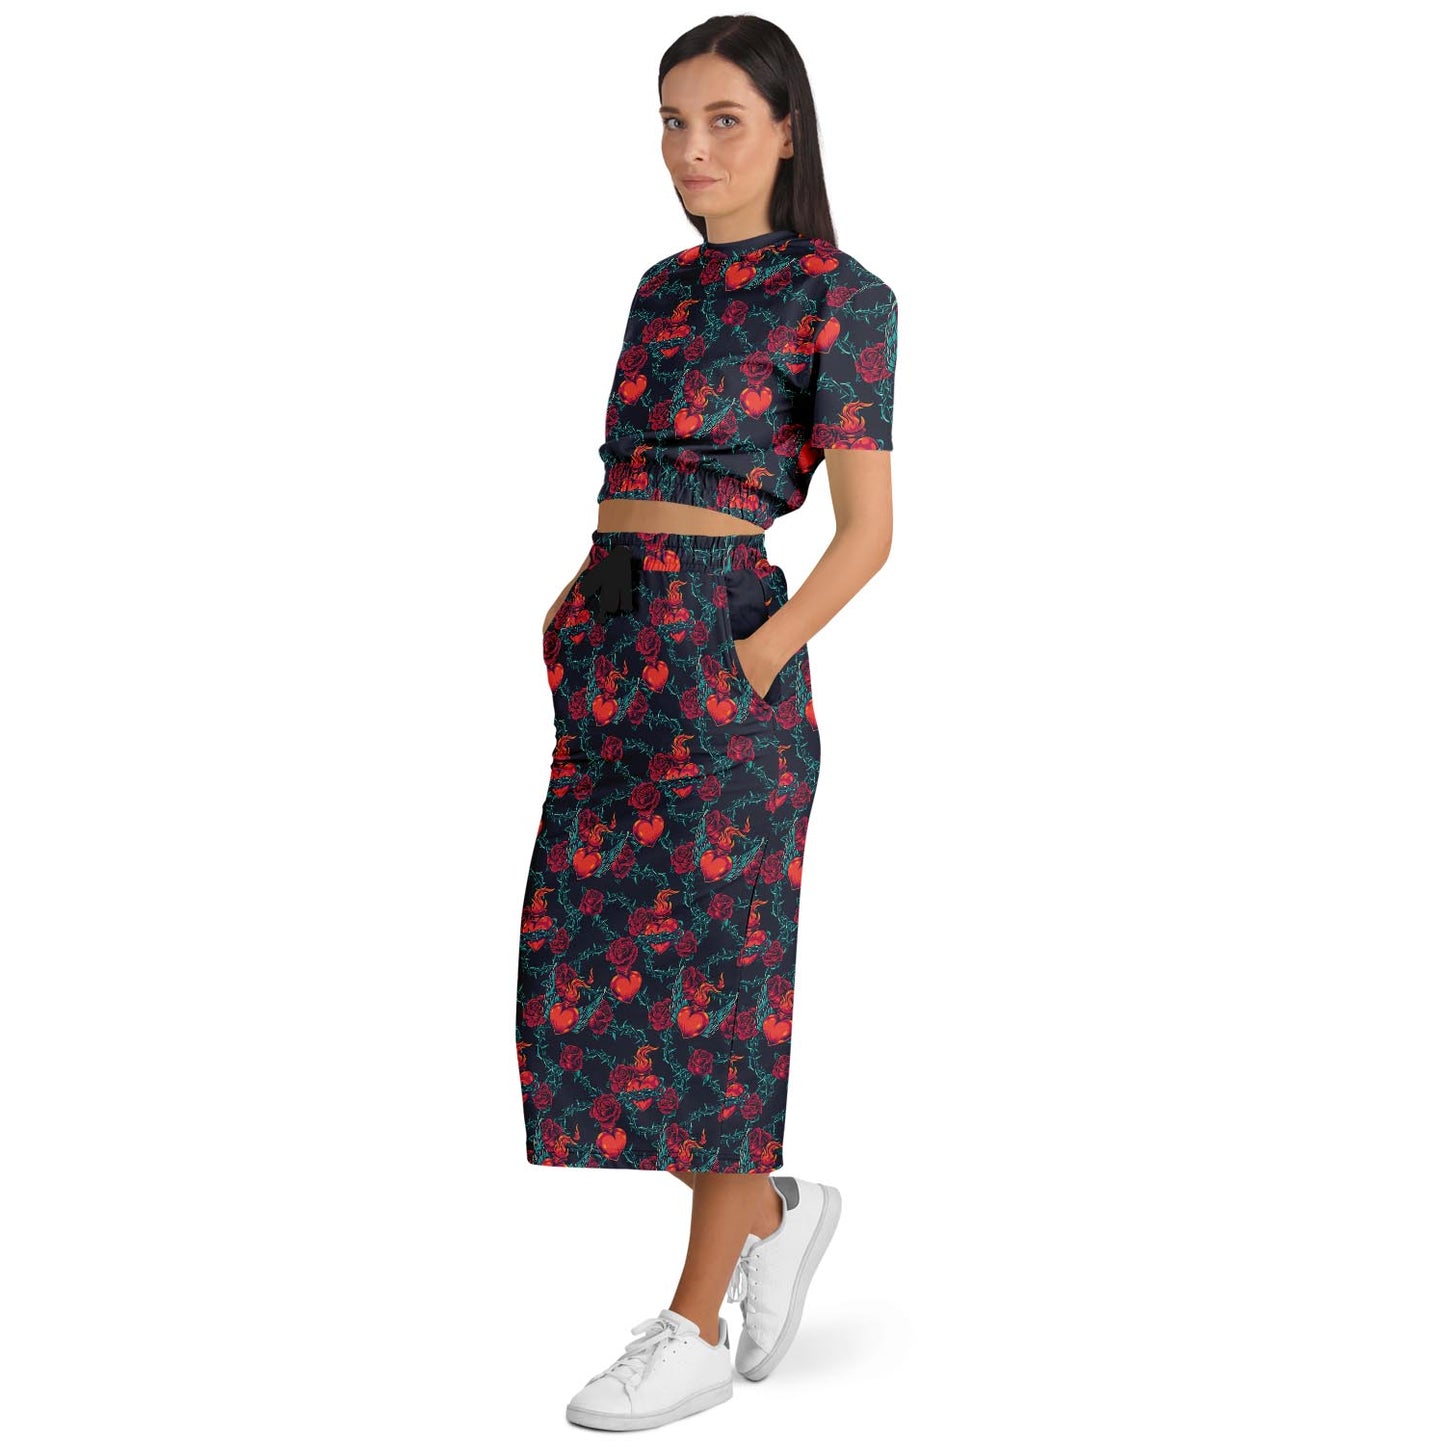 Fiery Hearts and Roses Sweatshirt and Skirt Set